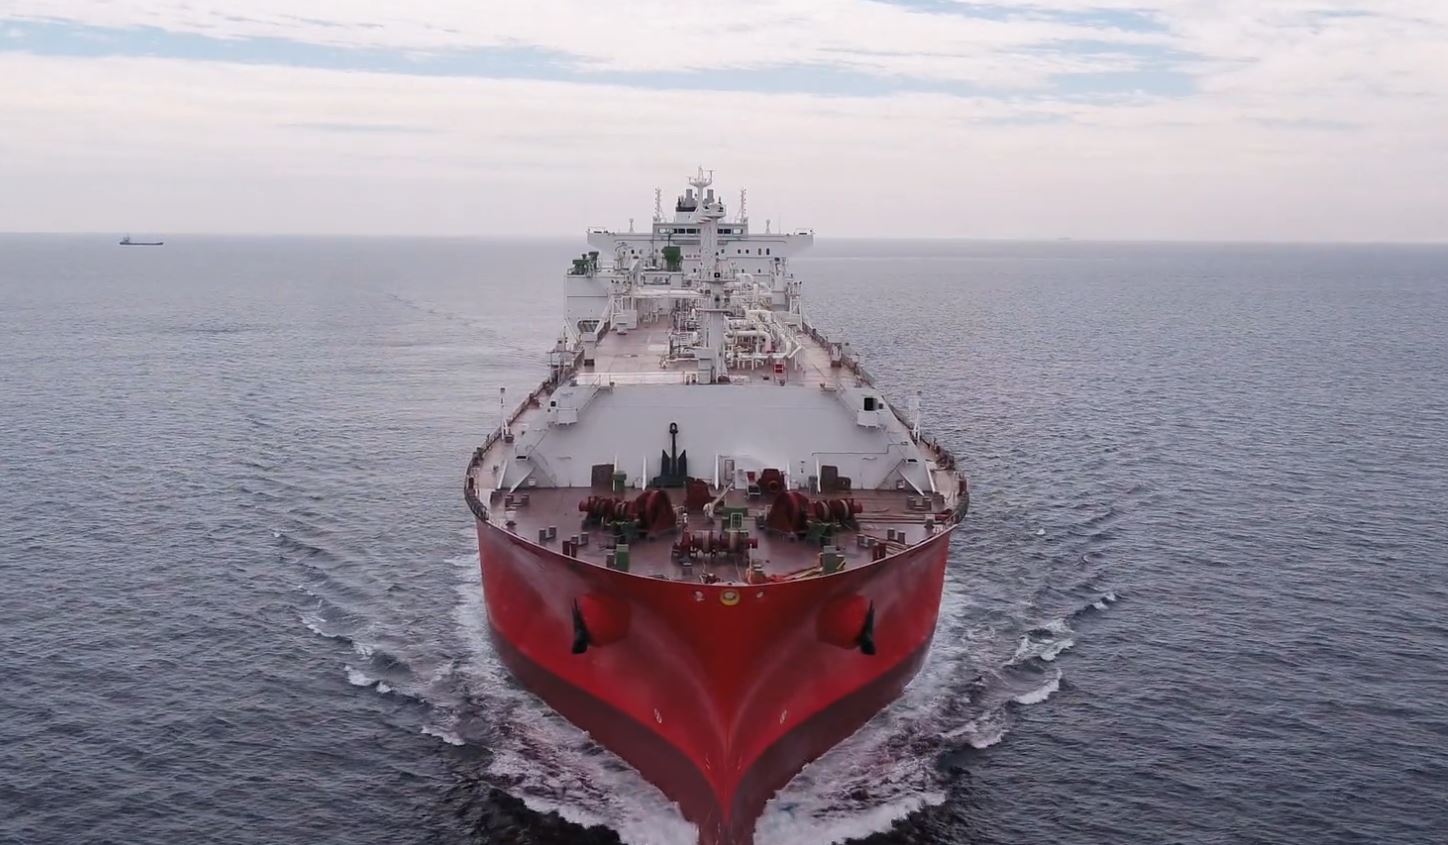 Celsius Tankers confirms orders for 4 x 180,000 cbm Ultra-Eco LNG carriers from Samsung Heavy Industries